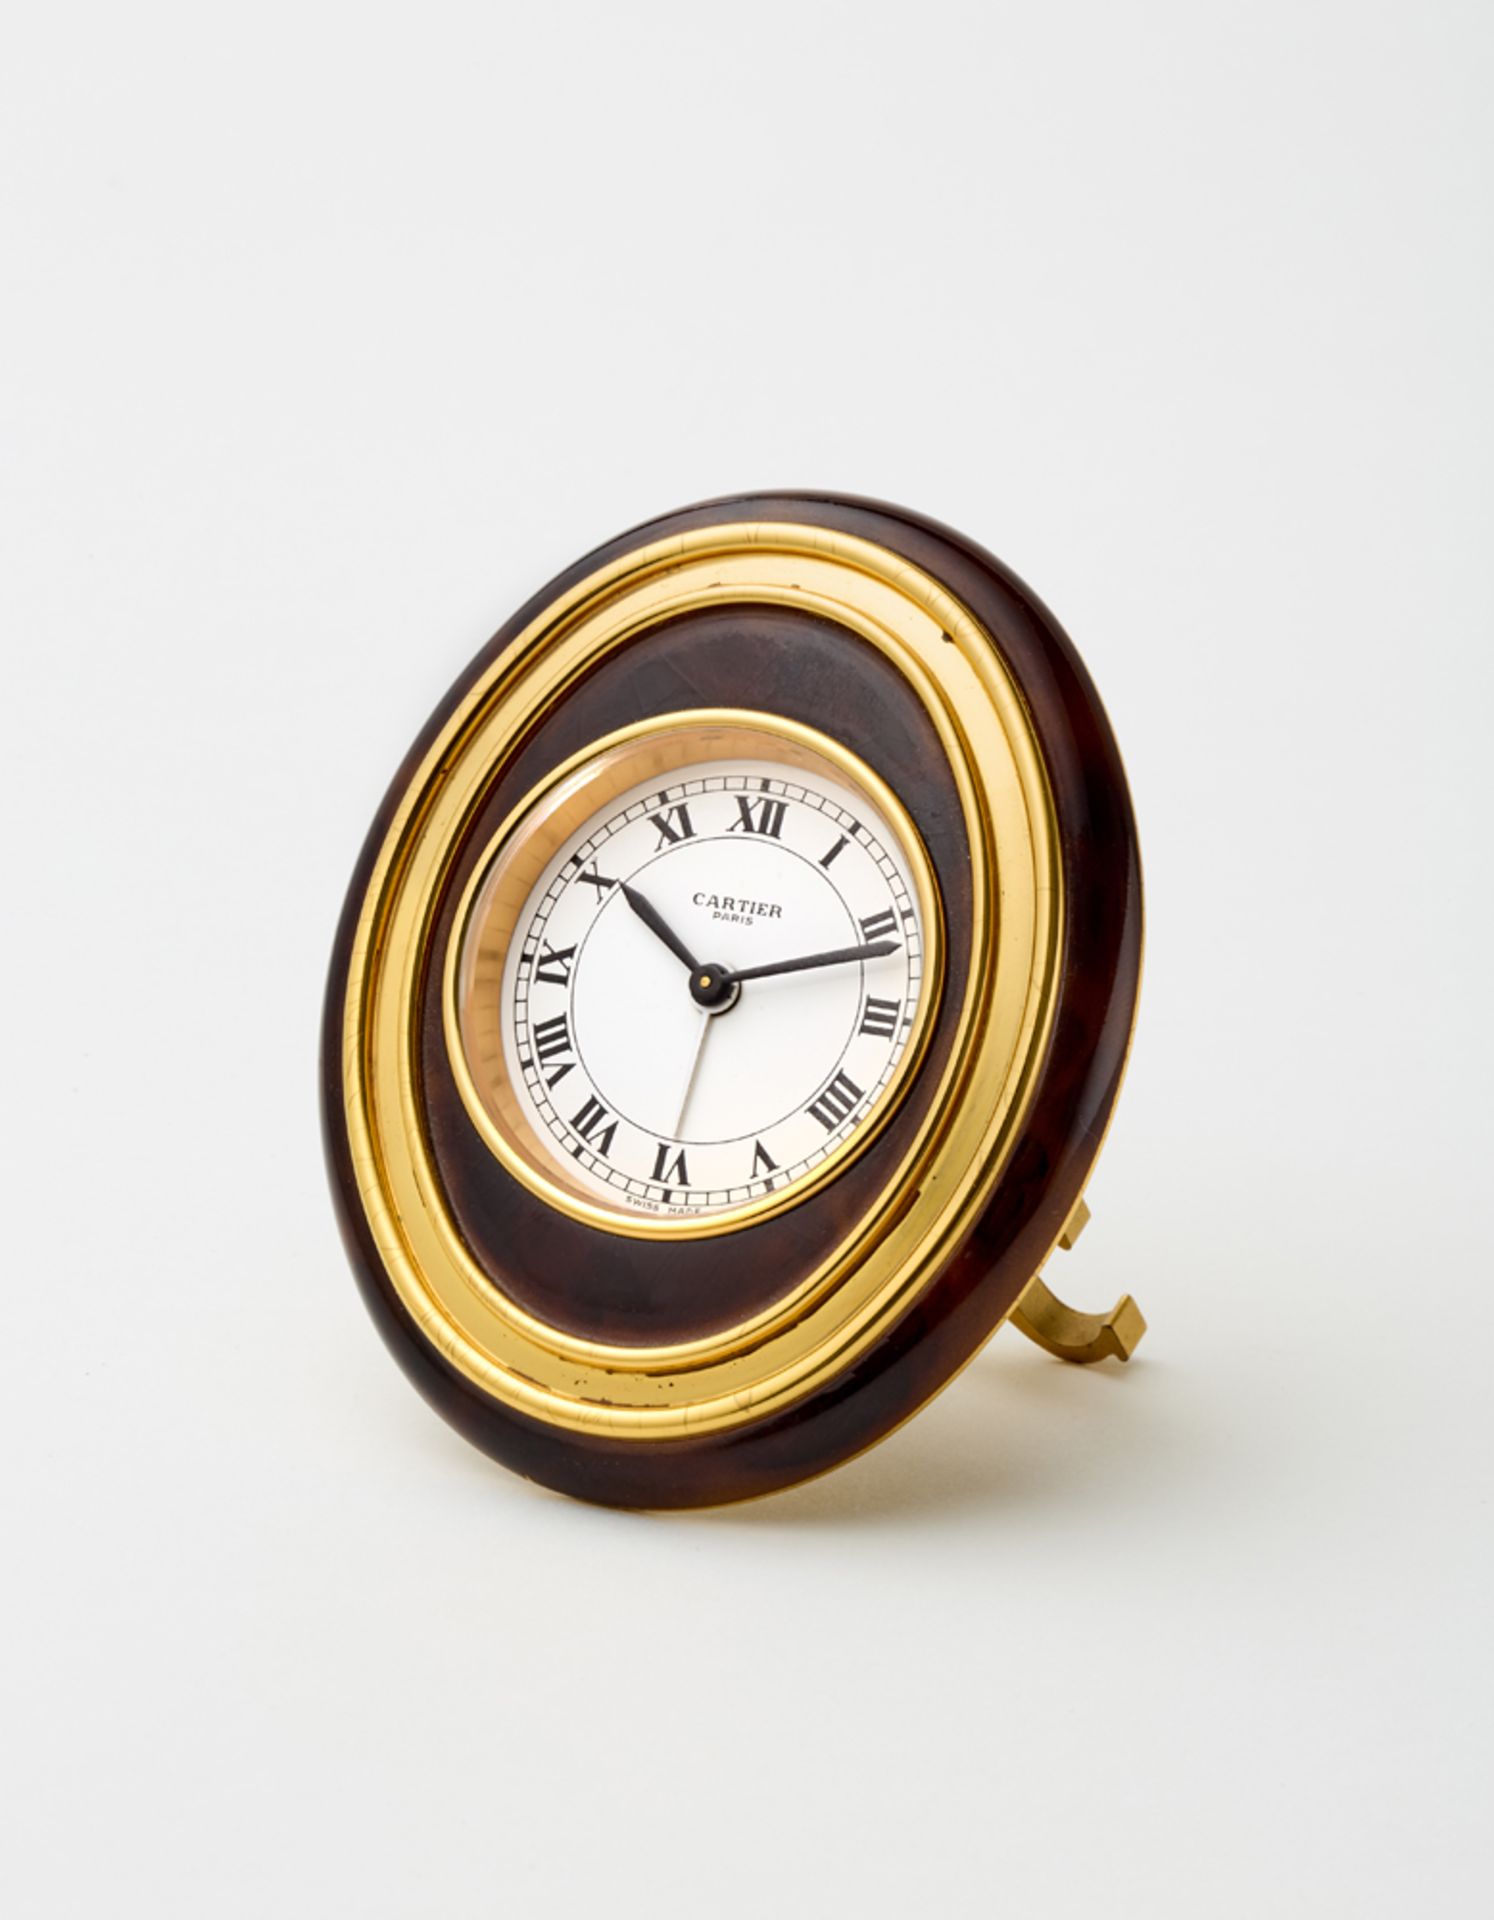 CARTIERElliptical lacquered gilt brass alarm clock with mechanical movement.70s of the twentieth